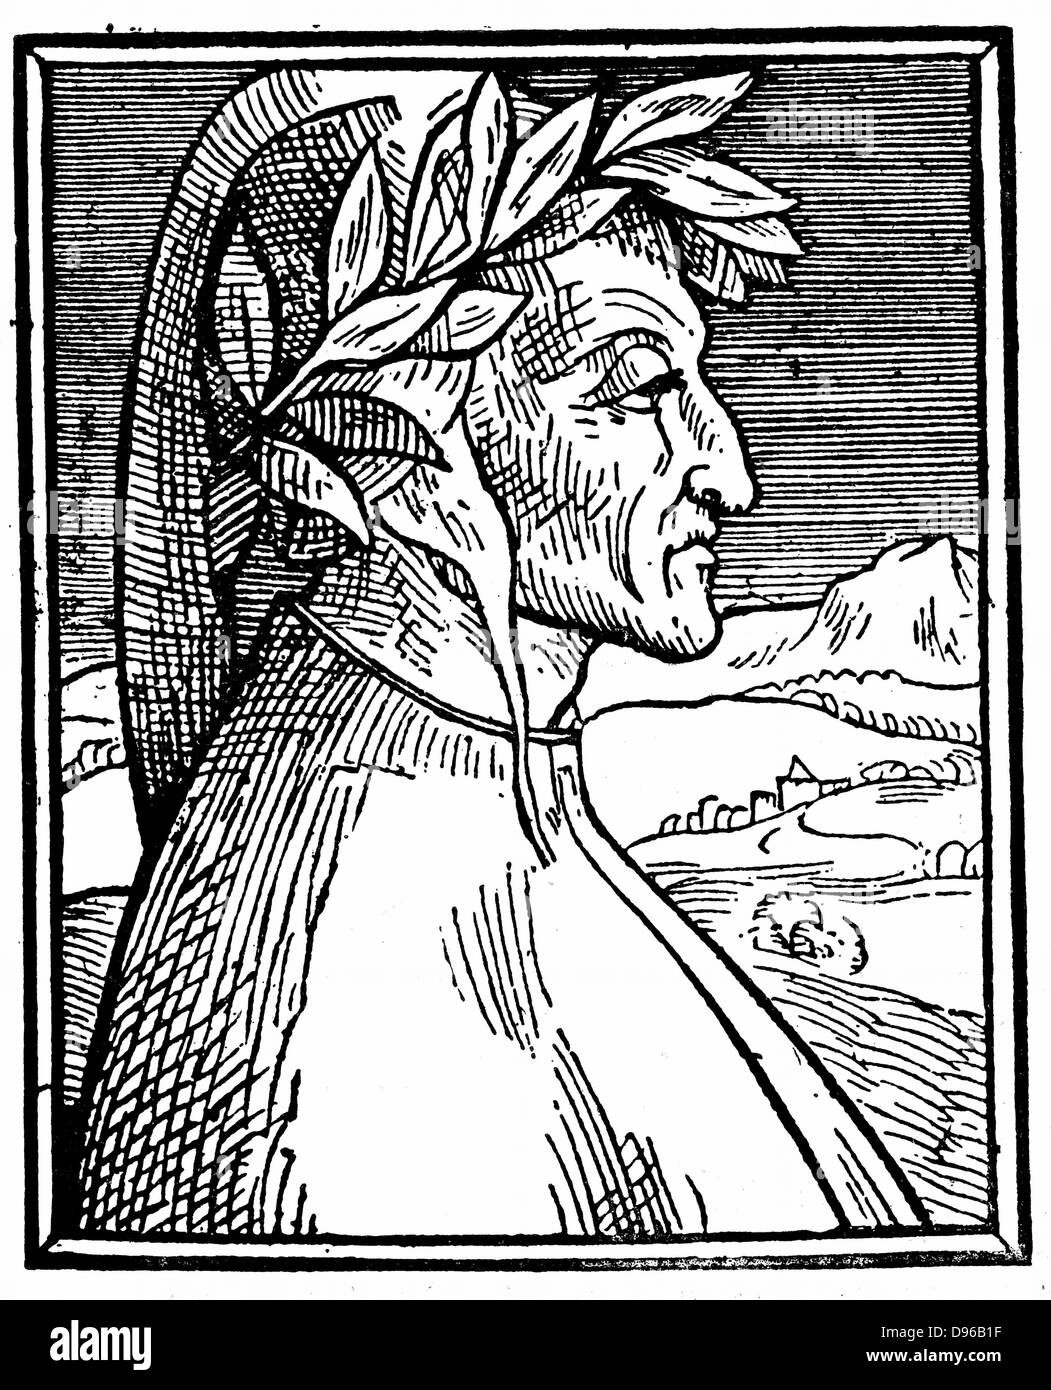 Dante Alighieri (1265-1321)  Italian poet.  Woodcut portrait published 1521, thought to be from miniature by Guilio Clovis Stock Photo